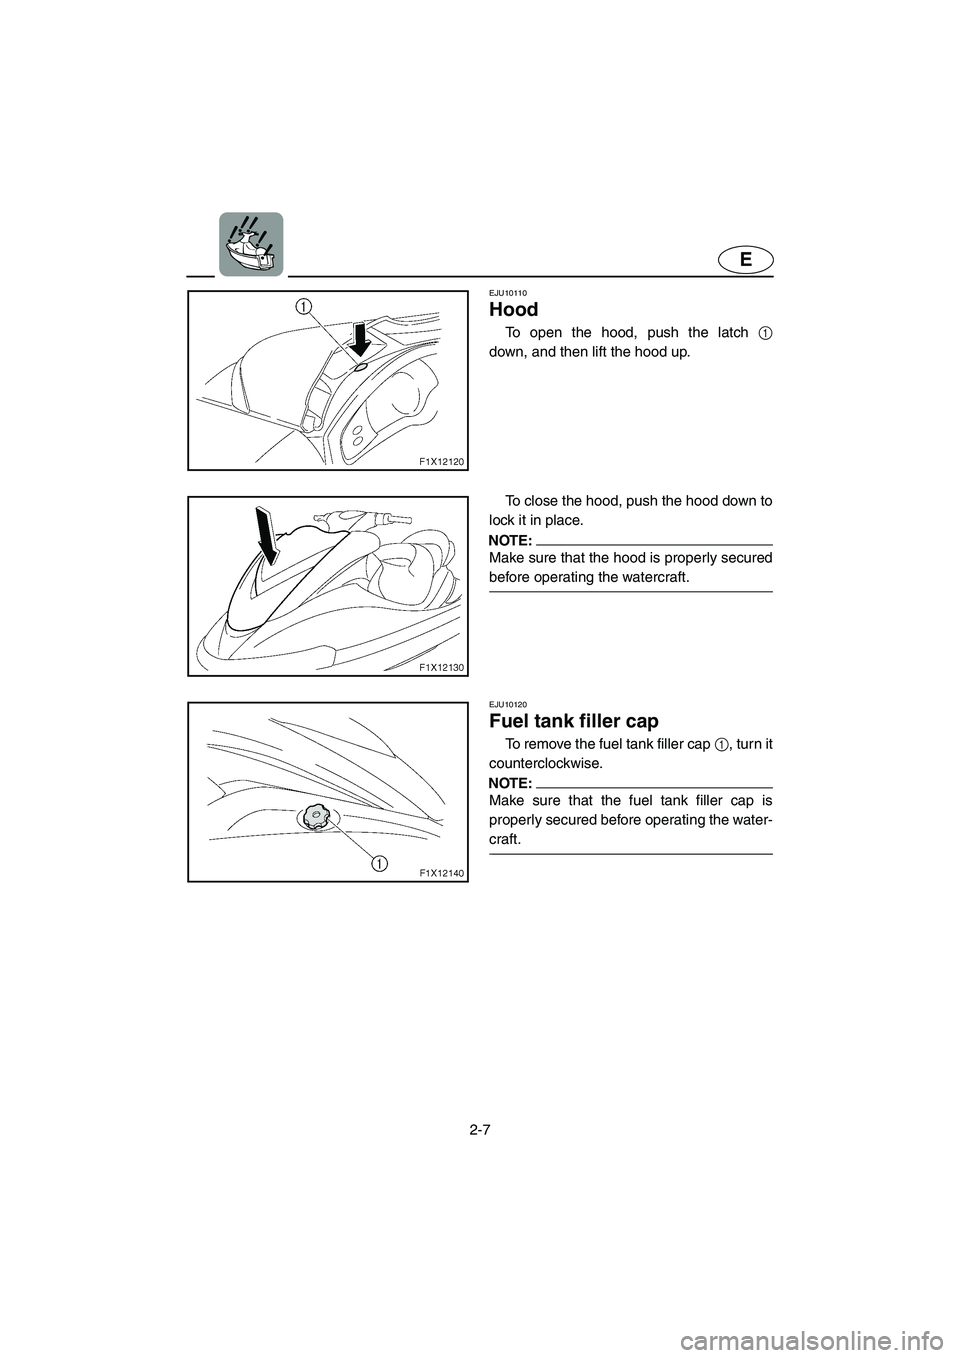 YAMAHA FX HO 2006 Owners Guide 2-7
E
EJU10110 
Hood  
To open the hood, push the latch 1
down, and then lift the hood up. 
To close the hood, push the hood down to
lock it in place. 
NOTE:@ Make sure that the hood is properly secur